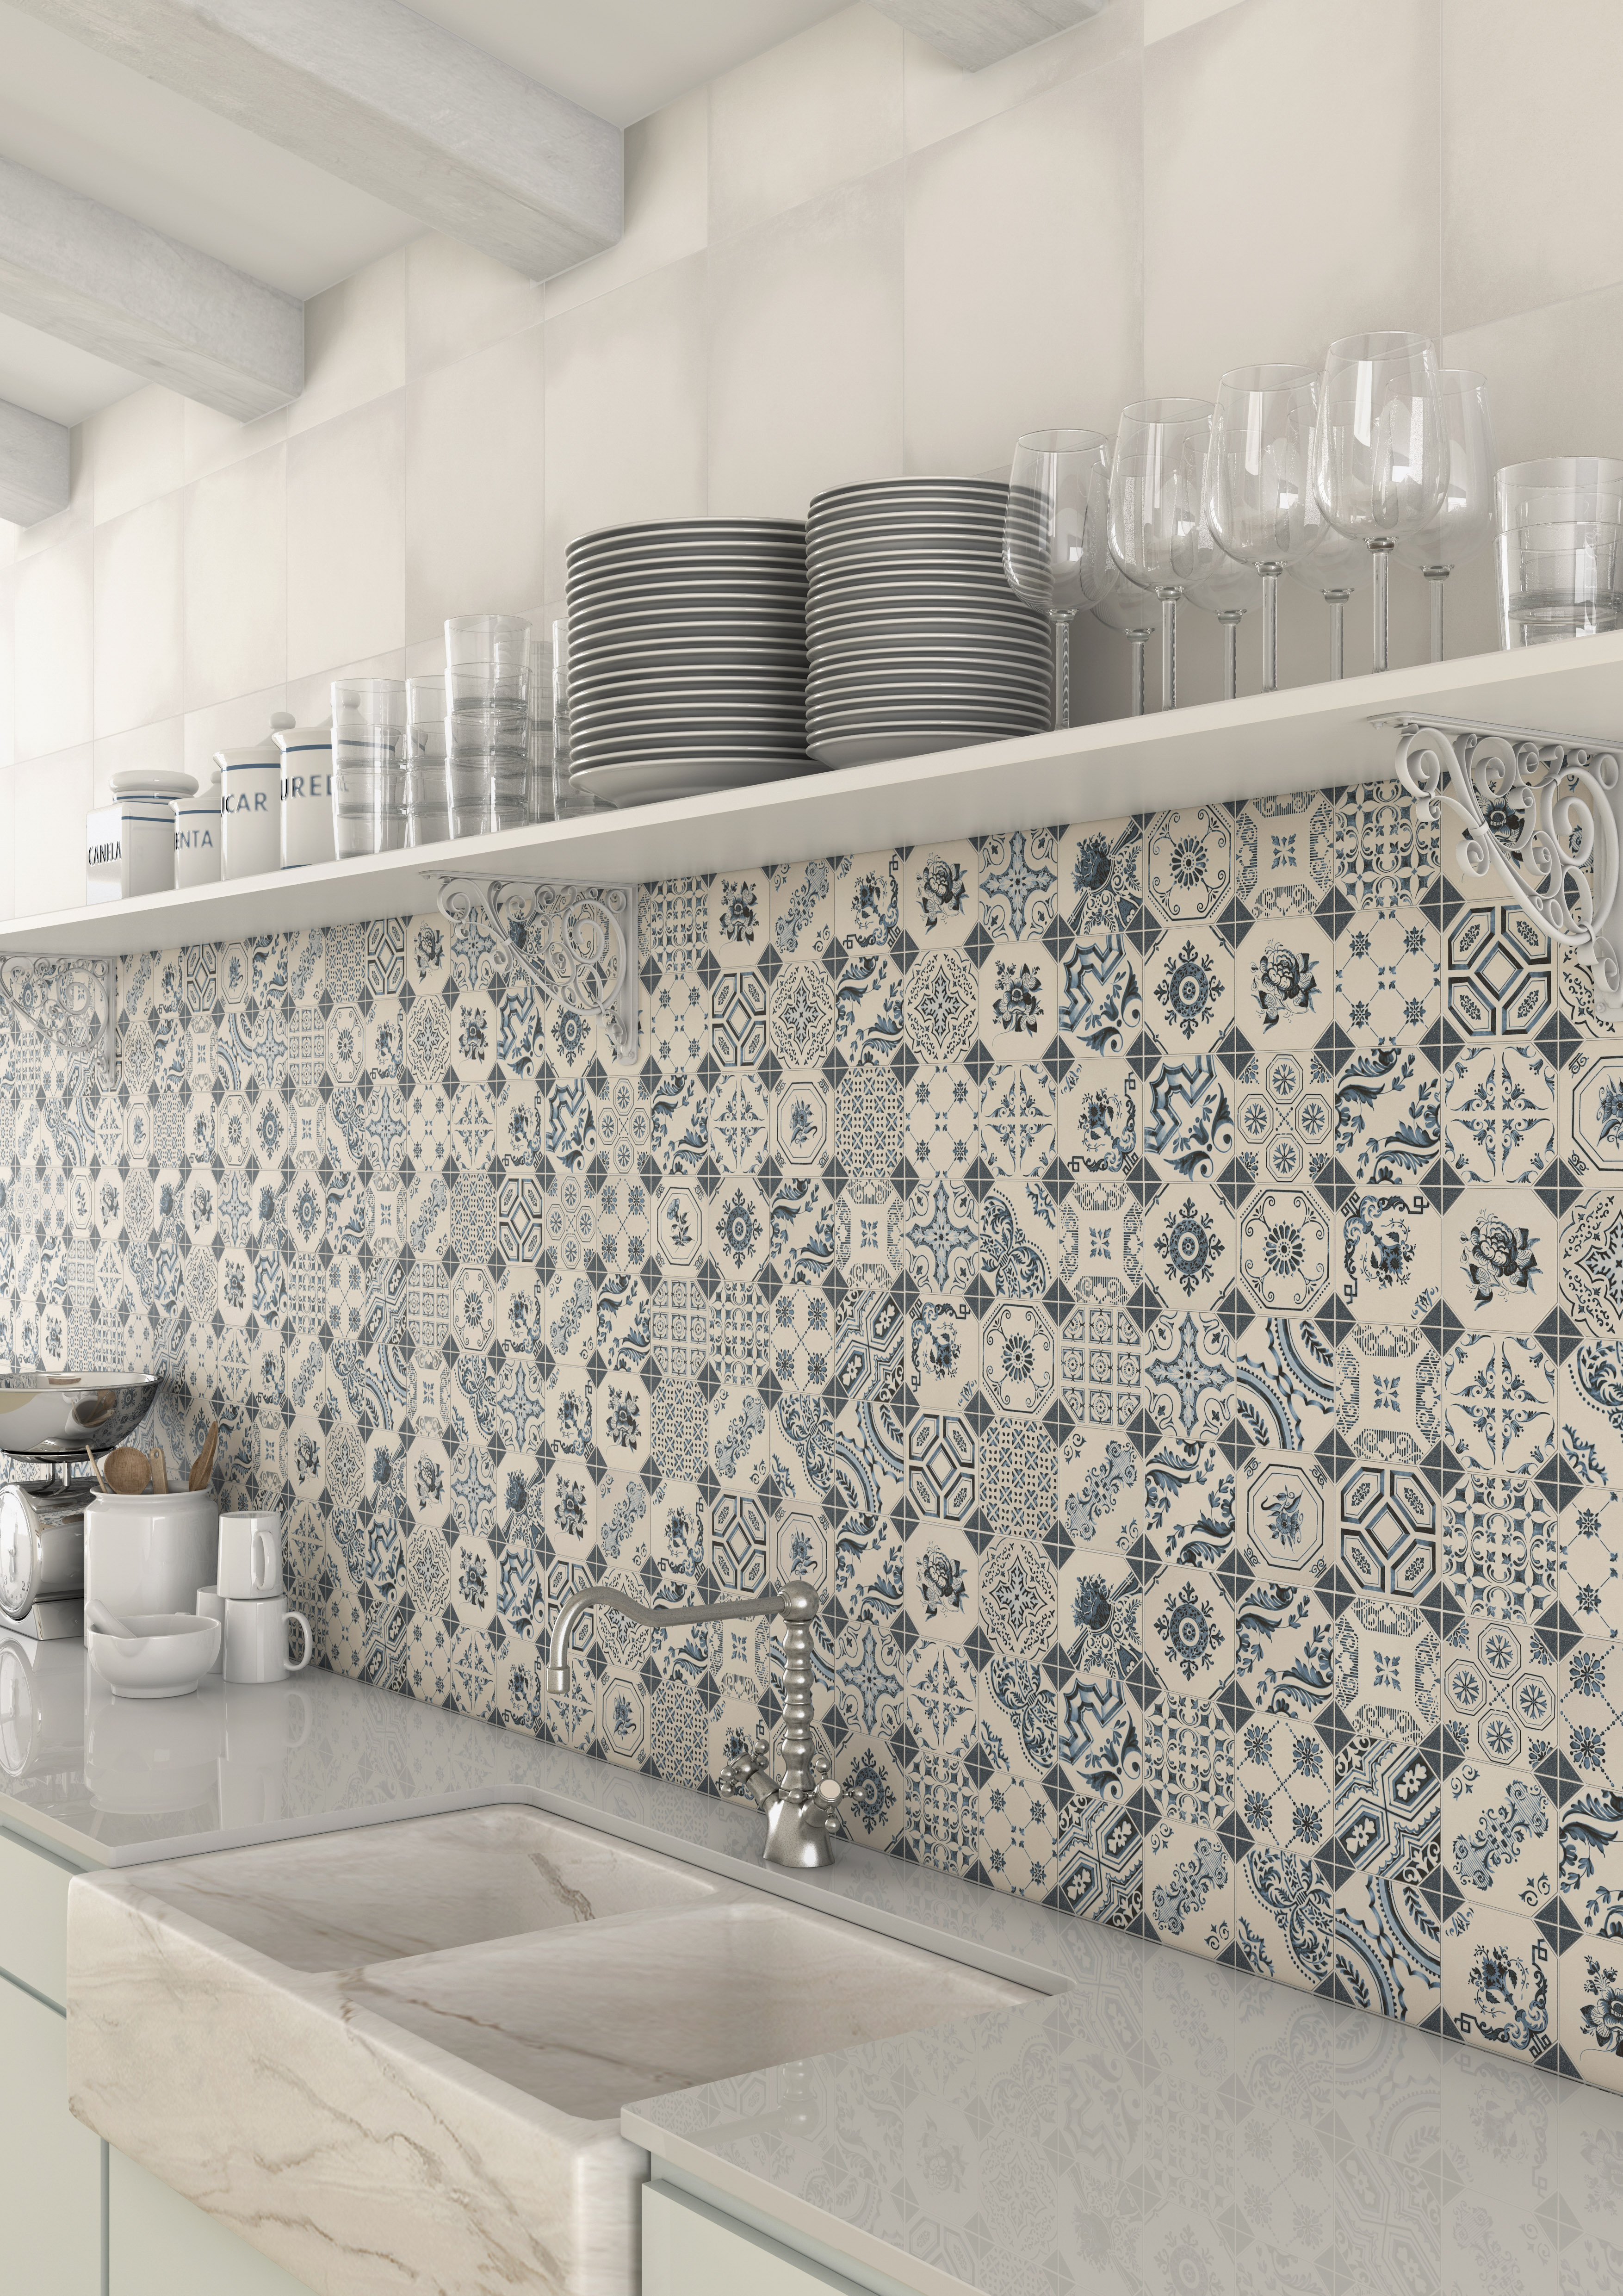 A Guide to Using Decorative Patterned Wall & Floor Tiles – Baked Tiles